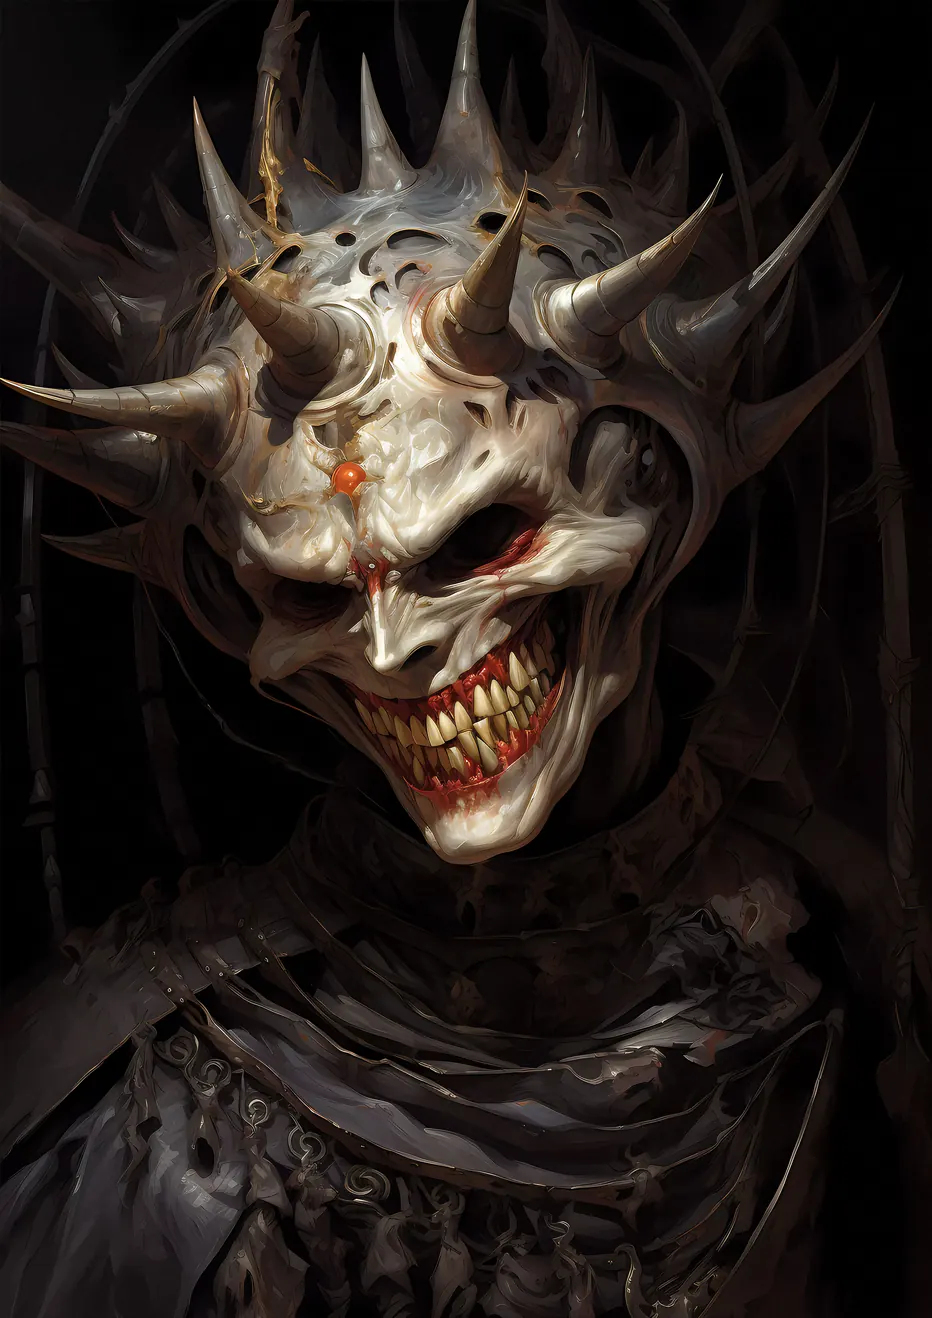 The Grin of Madness: Dark surreal artwork featuring a grim jester with sharp teeth, bloodied grin, and menacing spikes.